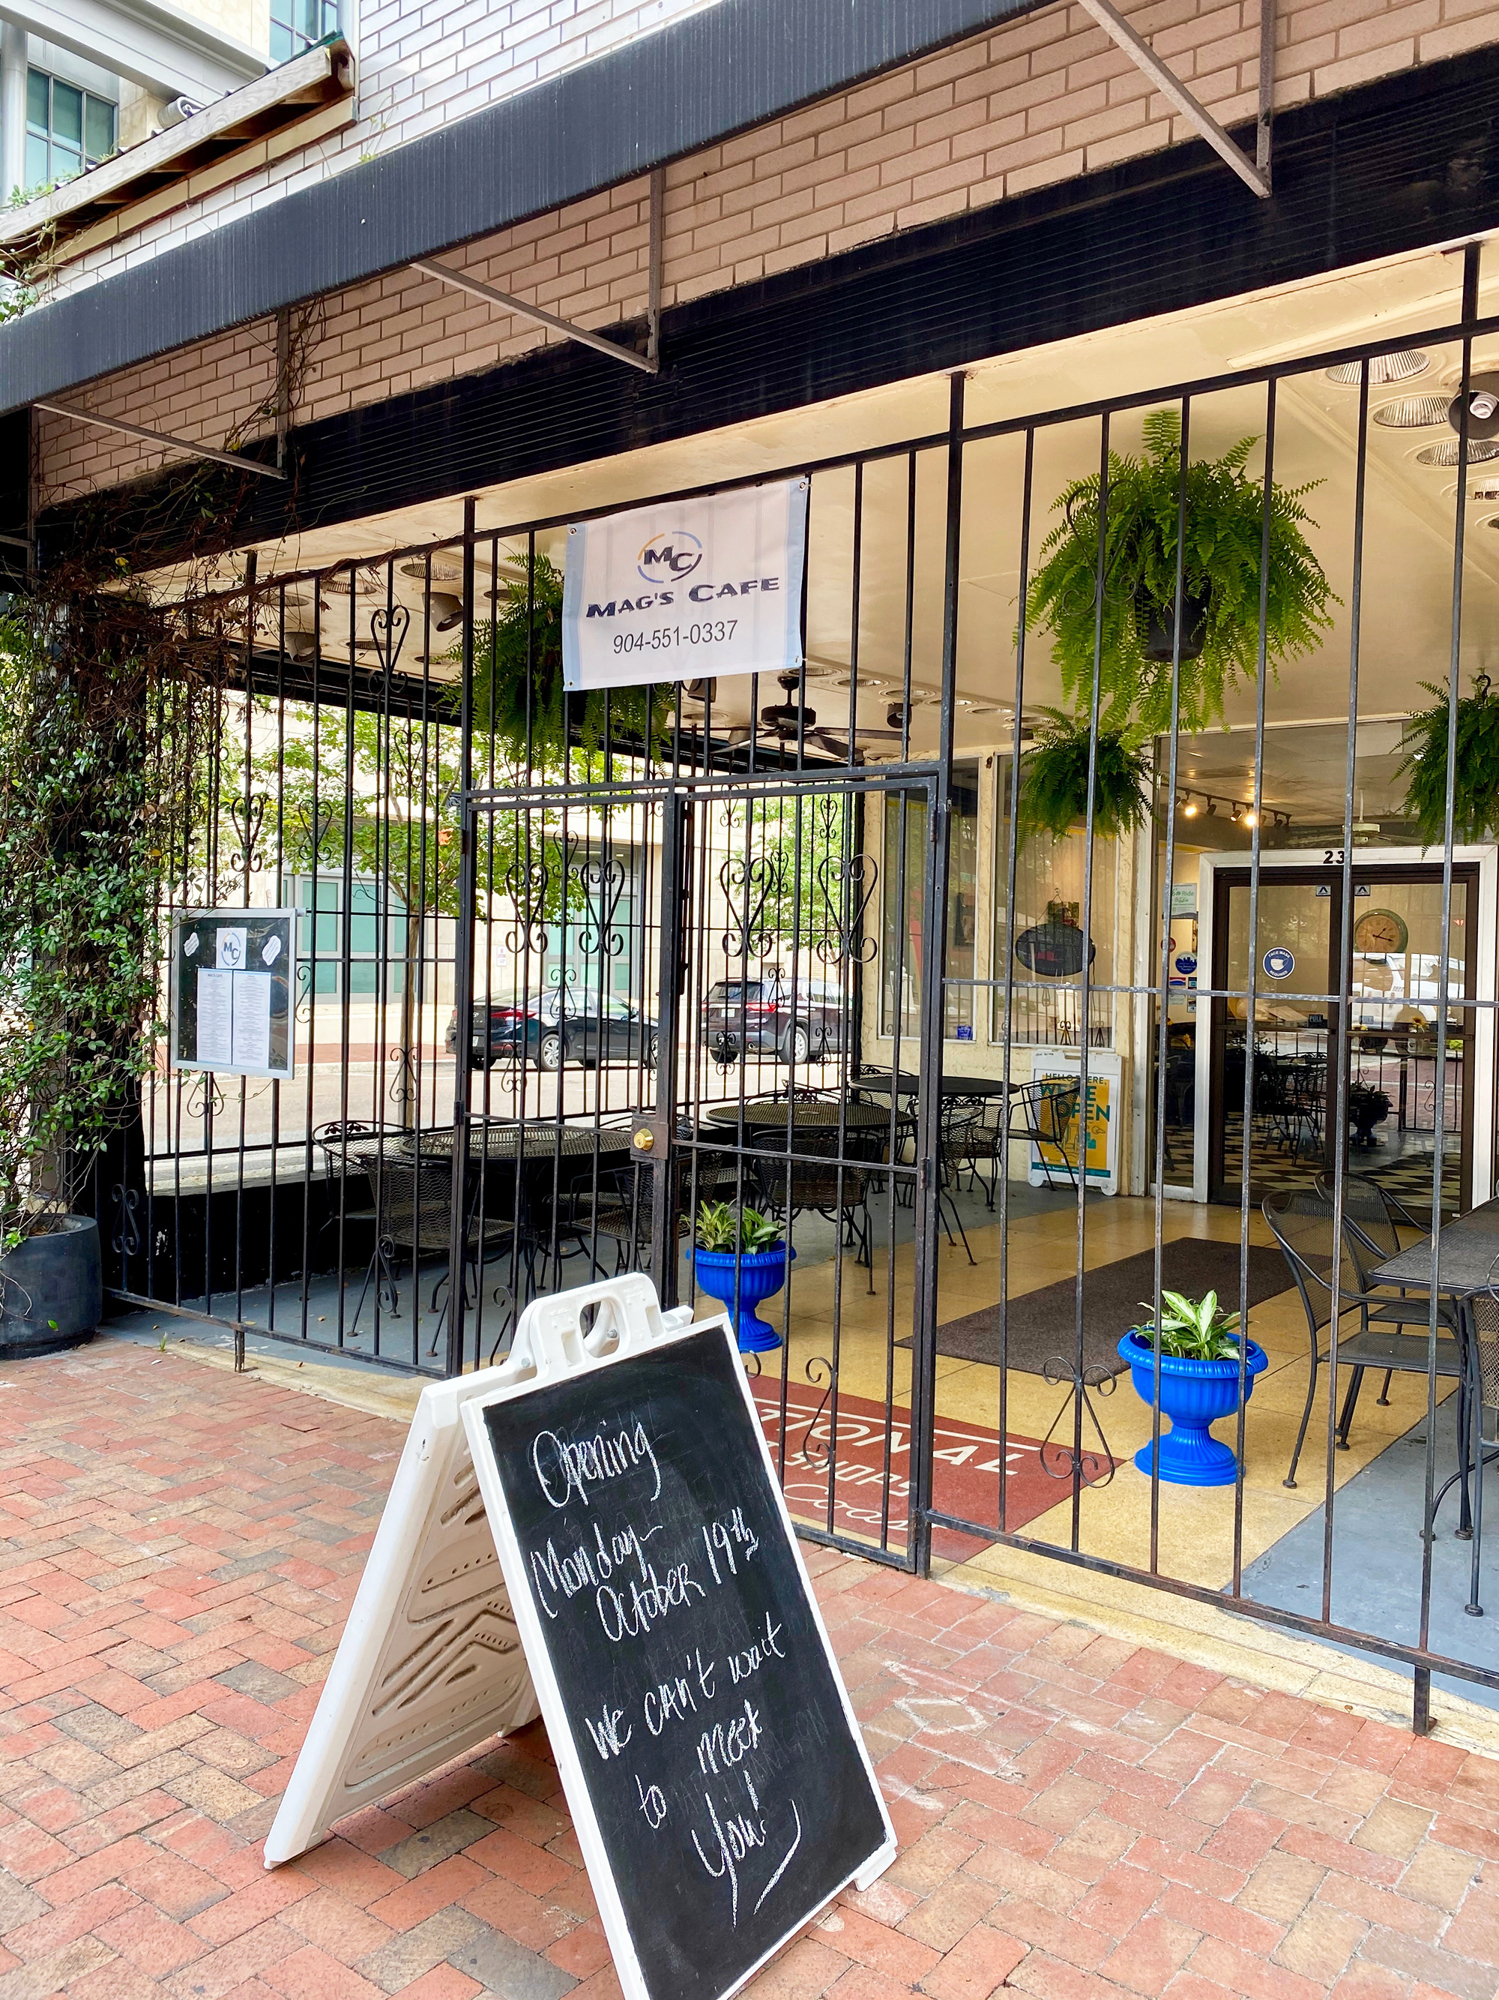 The new owners of Mags Cafe at 231 N. Laura St. Downtown intend to open at 9 a.m. Oct. 19. Most of the menu and the interior of the restaurant will look similar to the Magnificat Cafe, which closed Aug. 27.